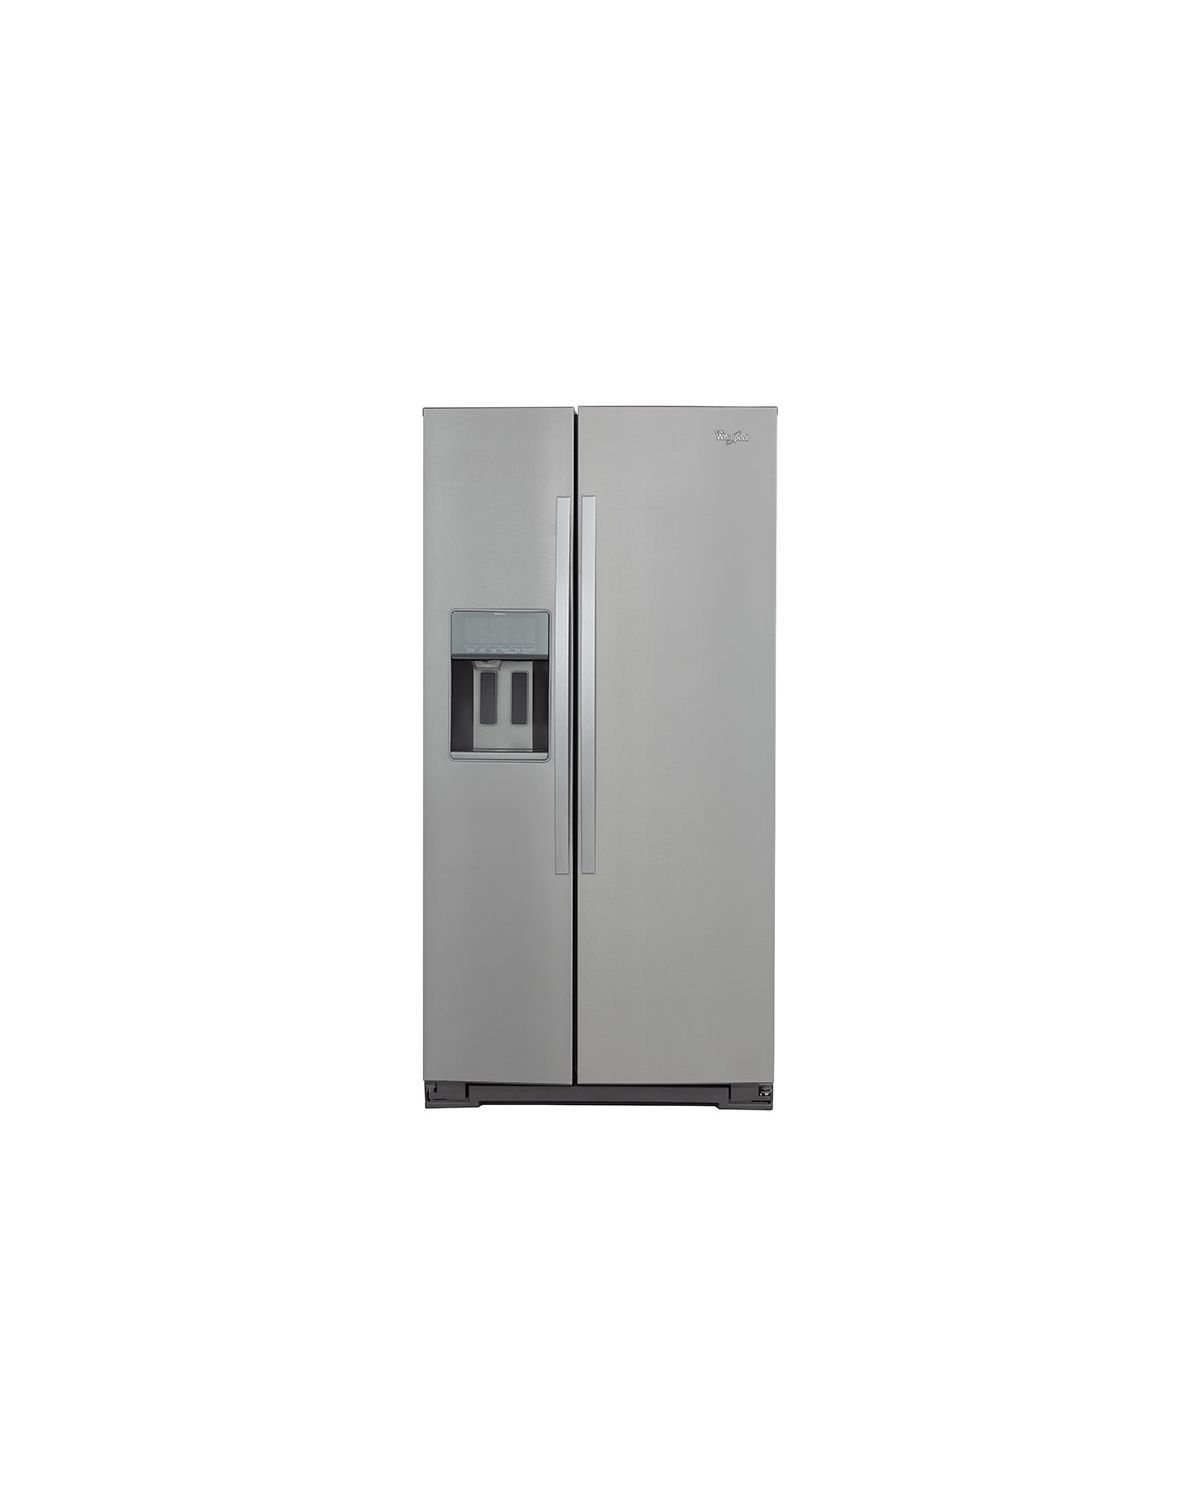 Whirlpool 36-inch Wide Side-by-Side Counter Depth Refrigerator with StoreRight Dual Cooling System - 23 cu. ft. Monochromatic Stainless Steel